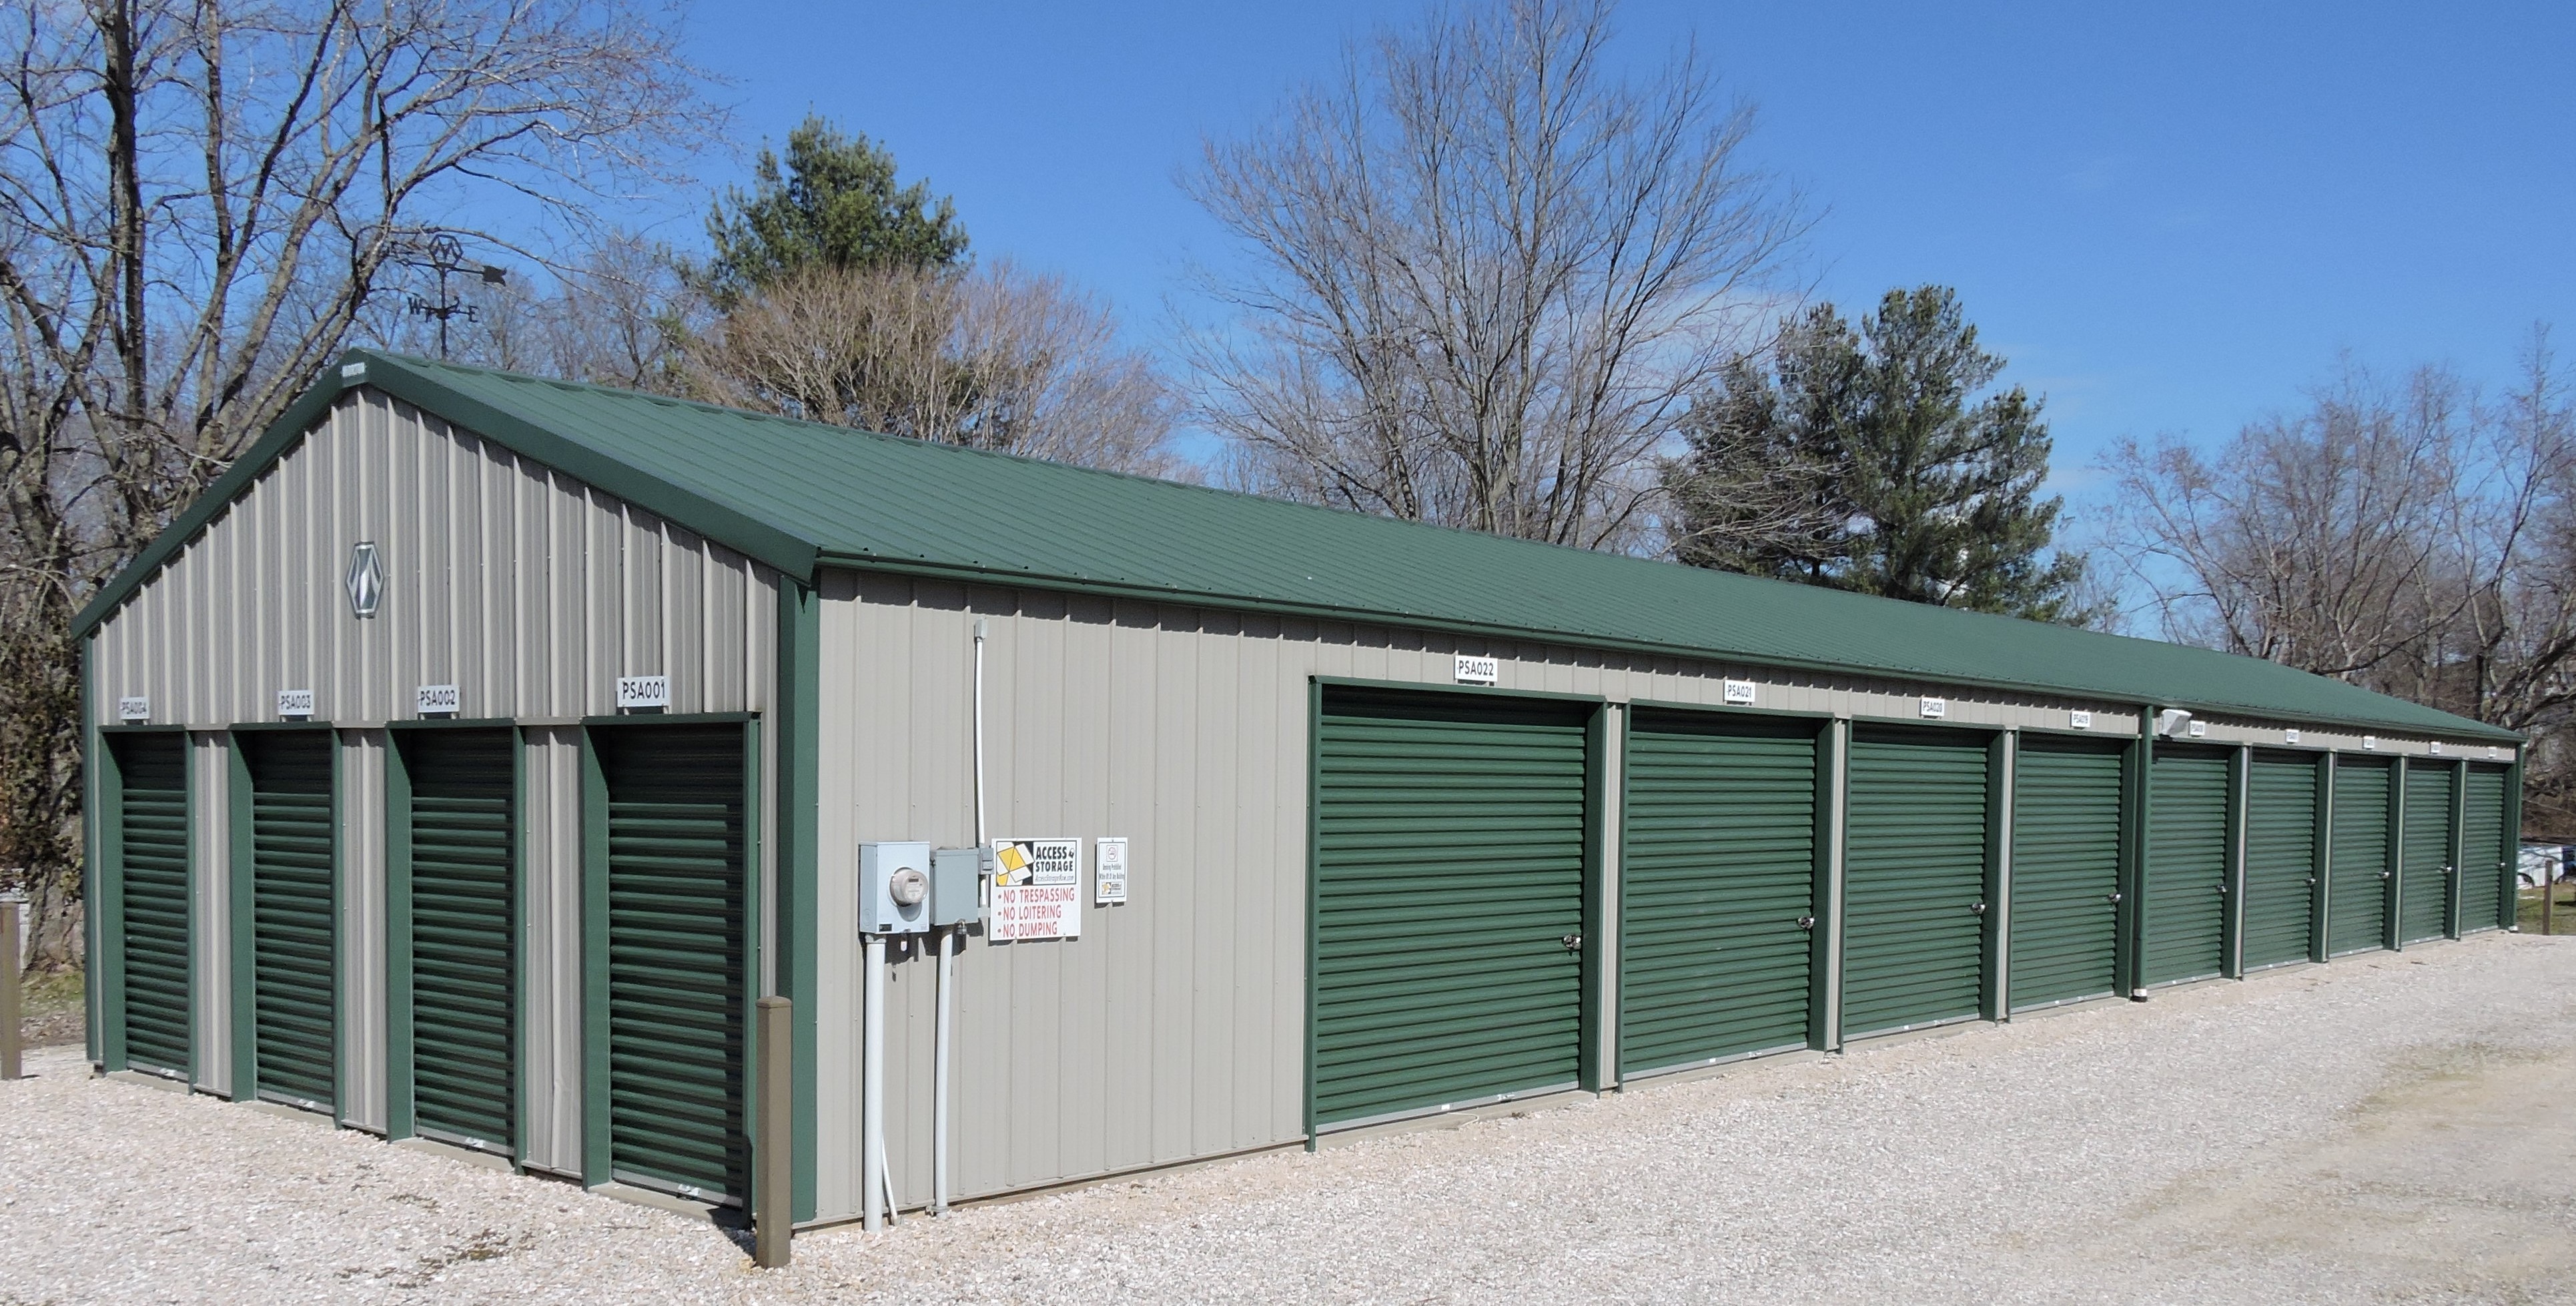 Access Storage Now in Birdseye: Drive-up storage units with distinctive green doors, available 24/7 with online payment feature.